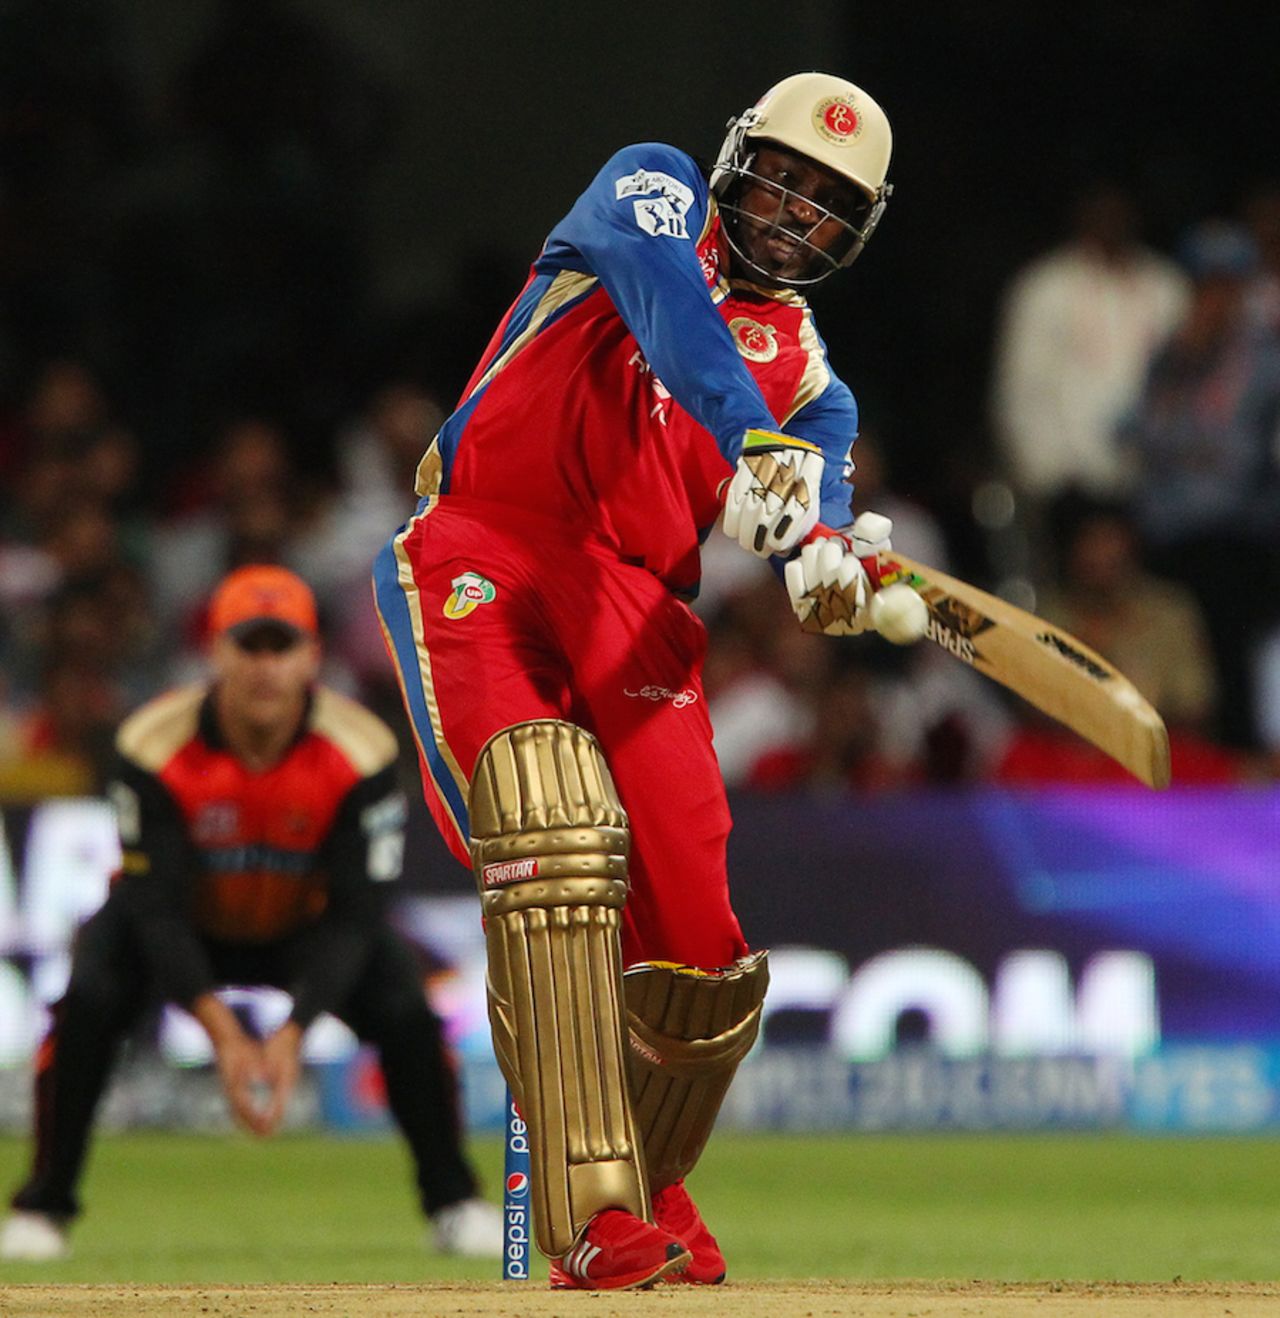 Chris Gayle launches one into the crowd, Royal Challengers Bangalore v Sunrisers Hyderabad, IPL, Bangalore, May 4, 2014